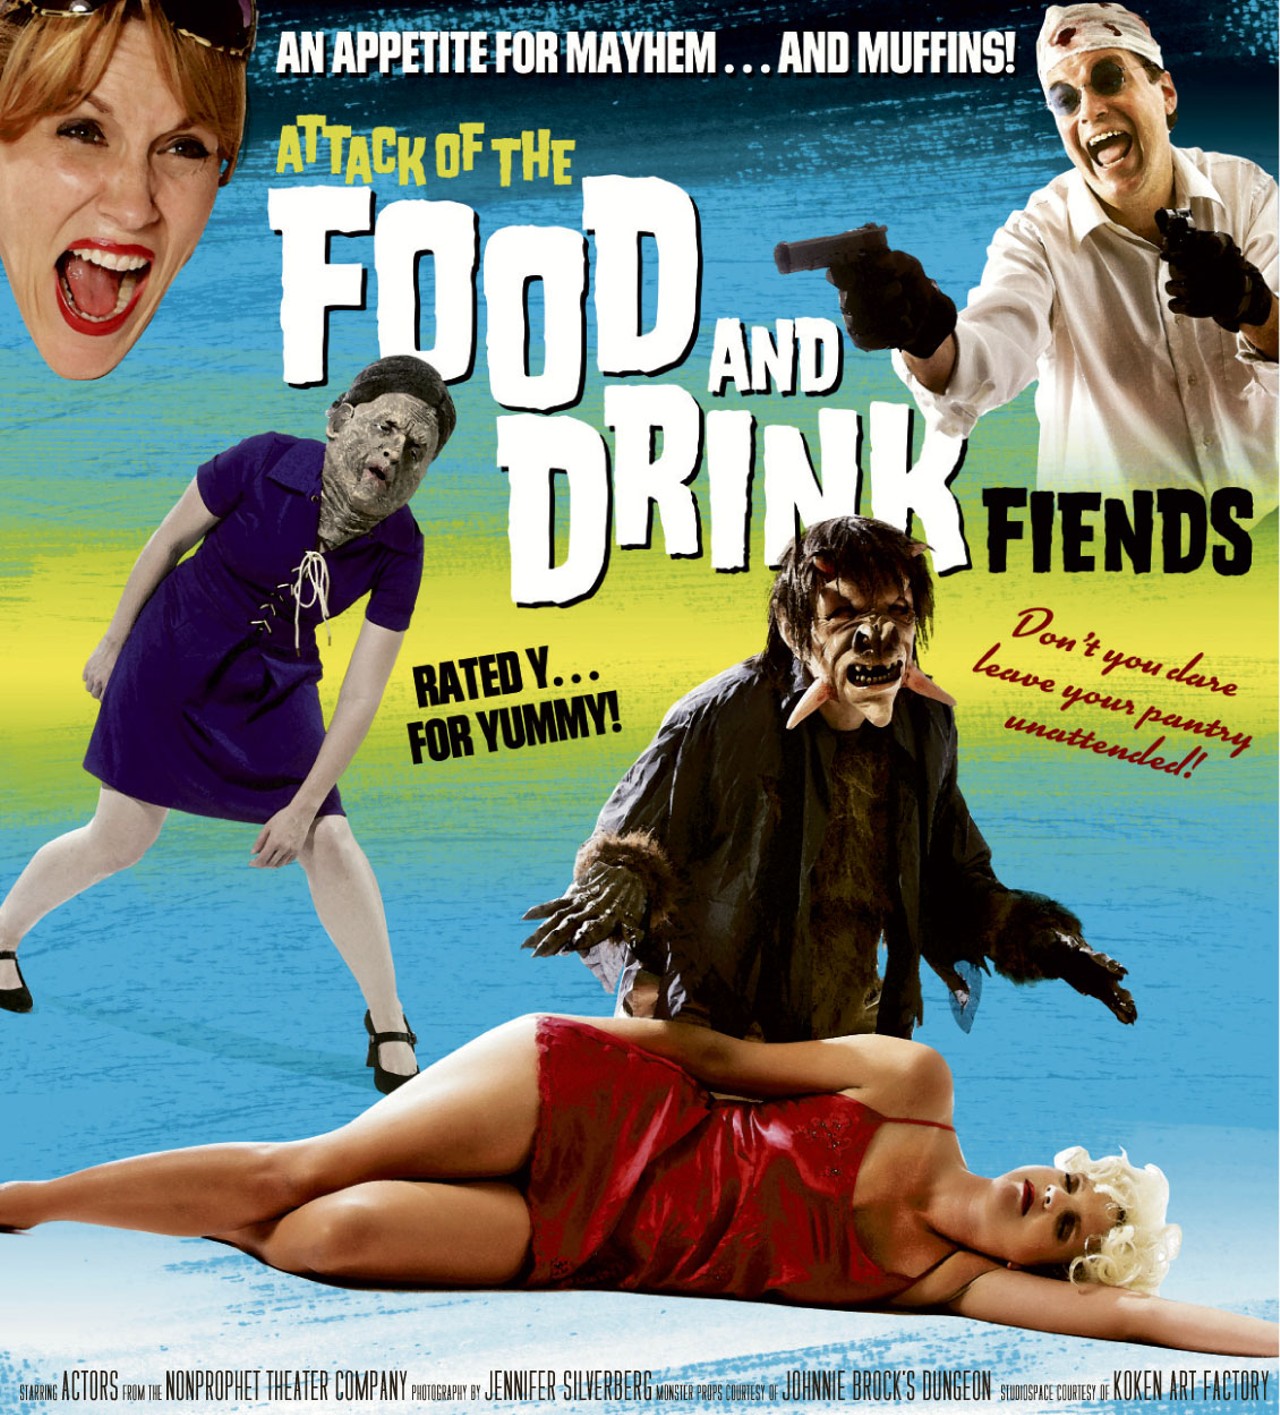 Attack of the Food and Drink Fiends: Kirsten Marie Wylder, B. Weller, Nicole Angeli and a pair of "Beasts."